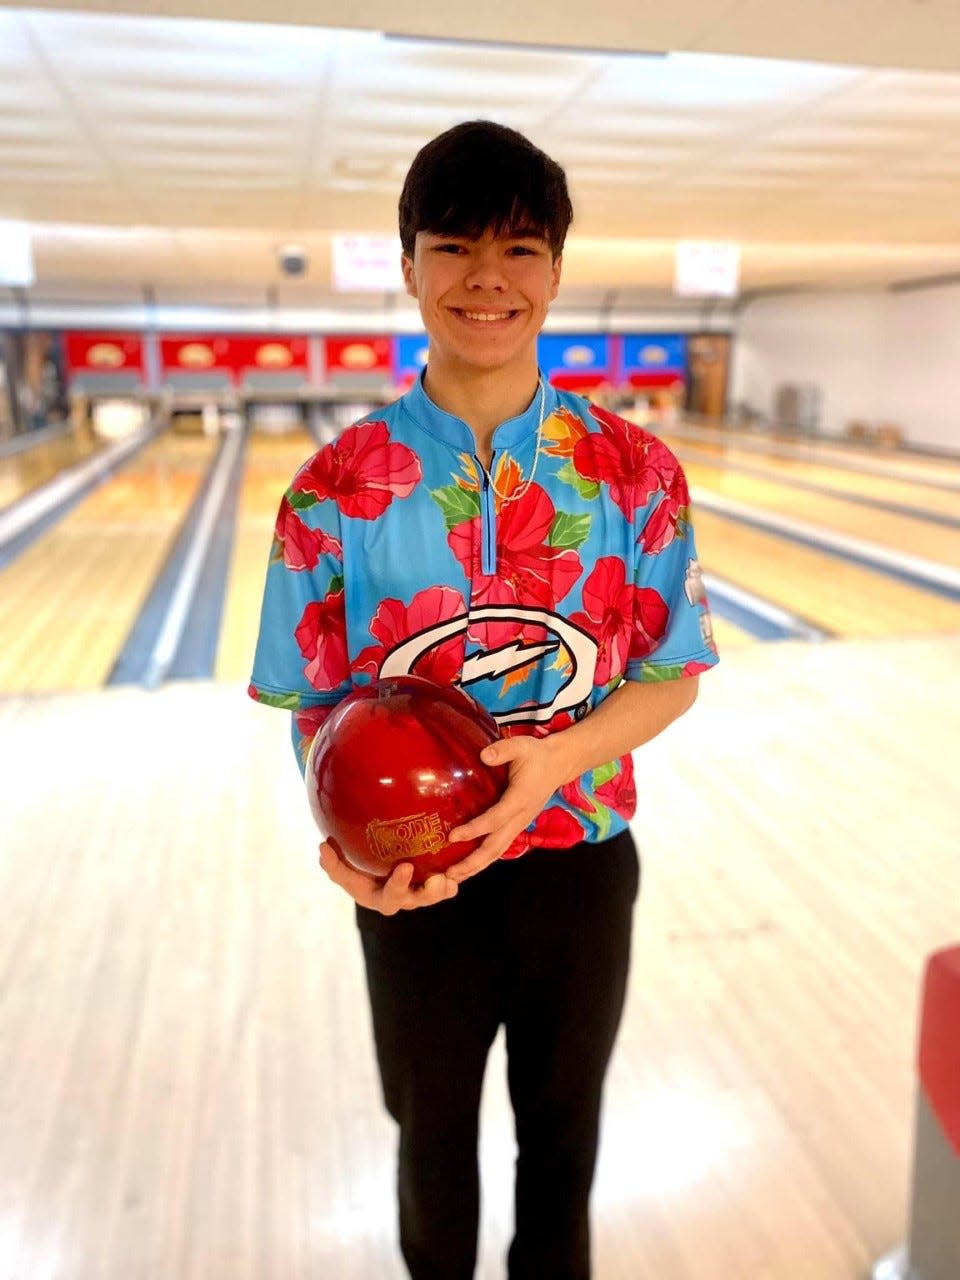 Heath junior Bryce Holmes bowled his first perfect game on Sunday at Village Lanes.